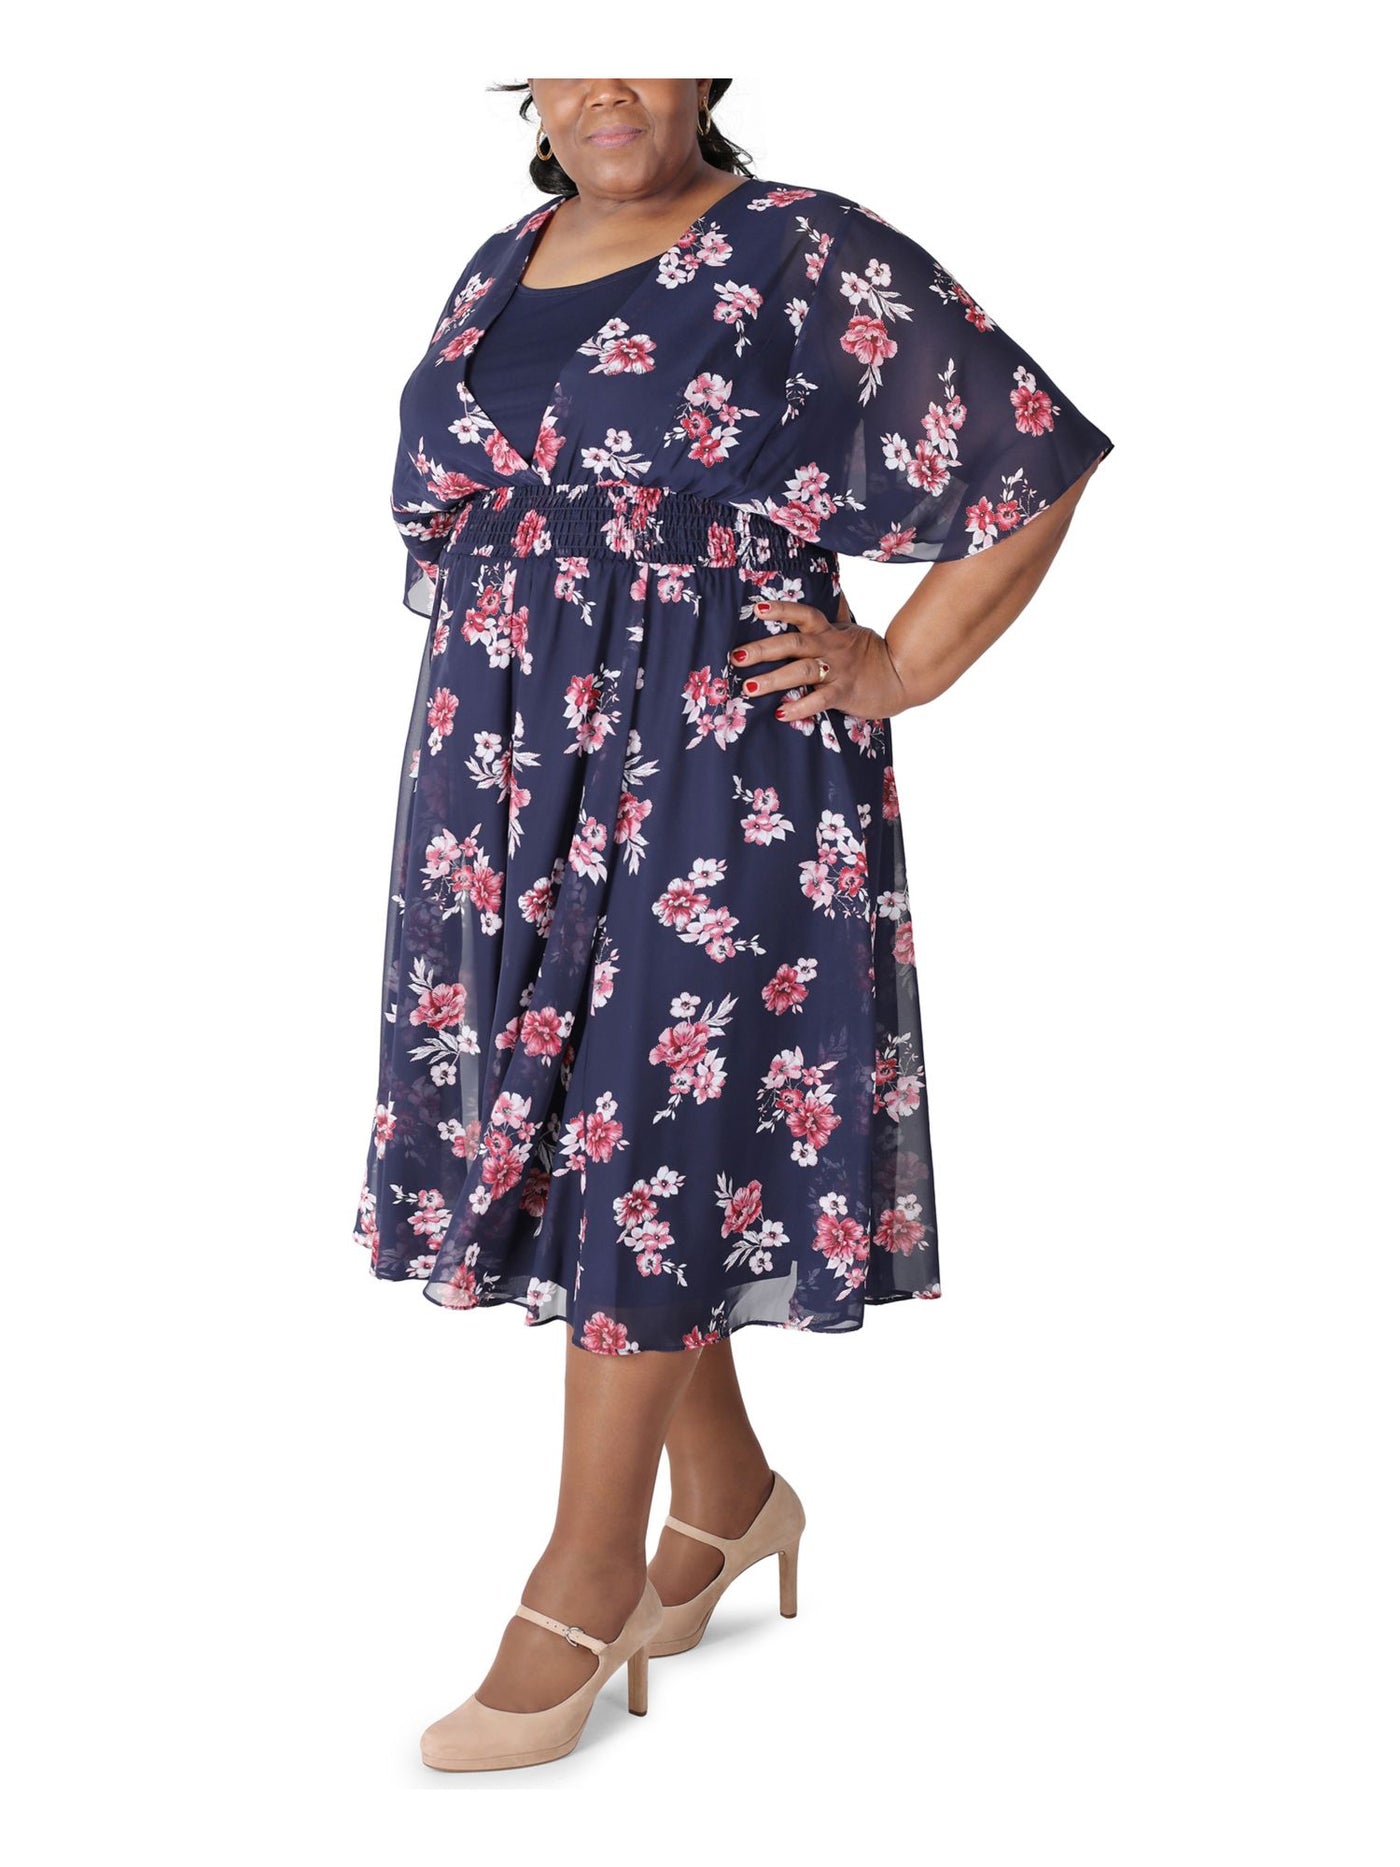 ROBBIE BEE Womens Navy Smocked Sheer Floral Elbow Sleeve Surplice Neckline Midi Party Fit + Flare Dress Plus S